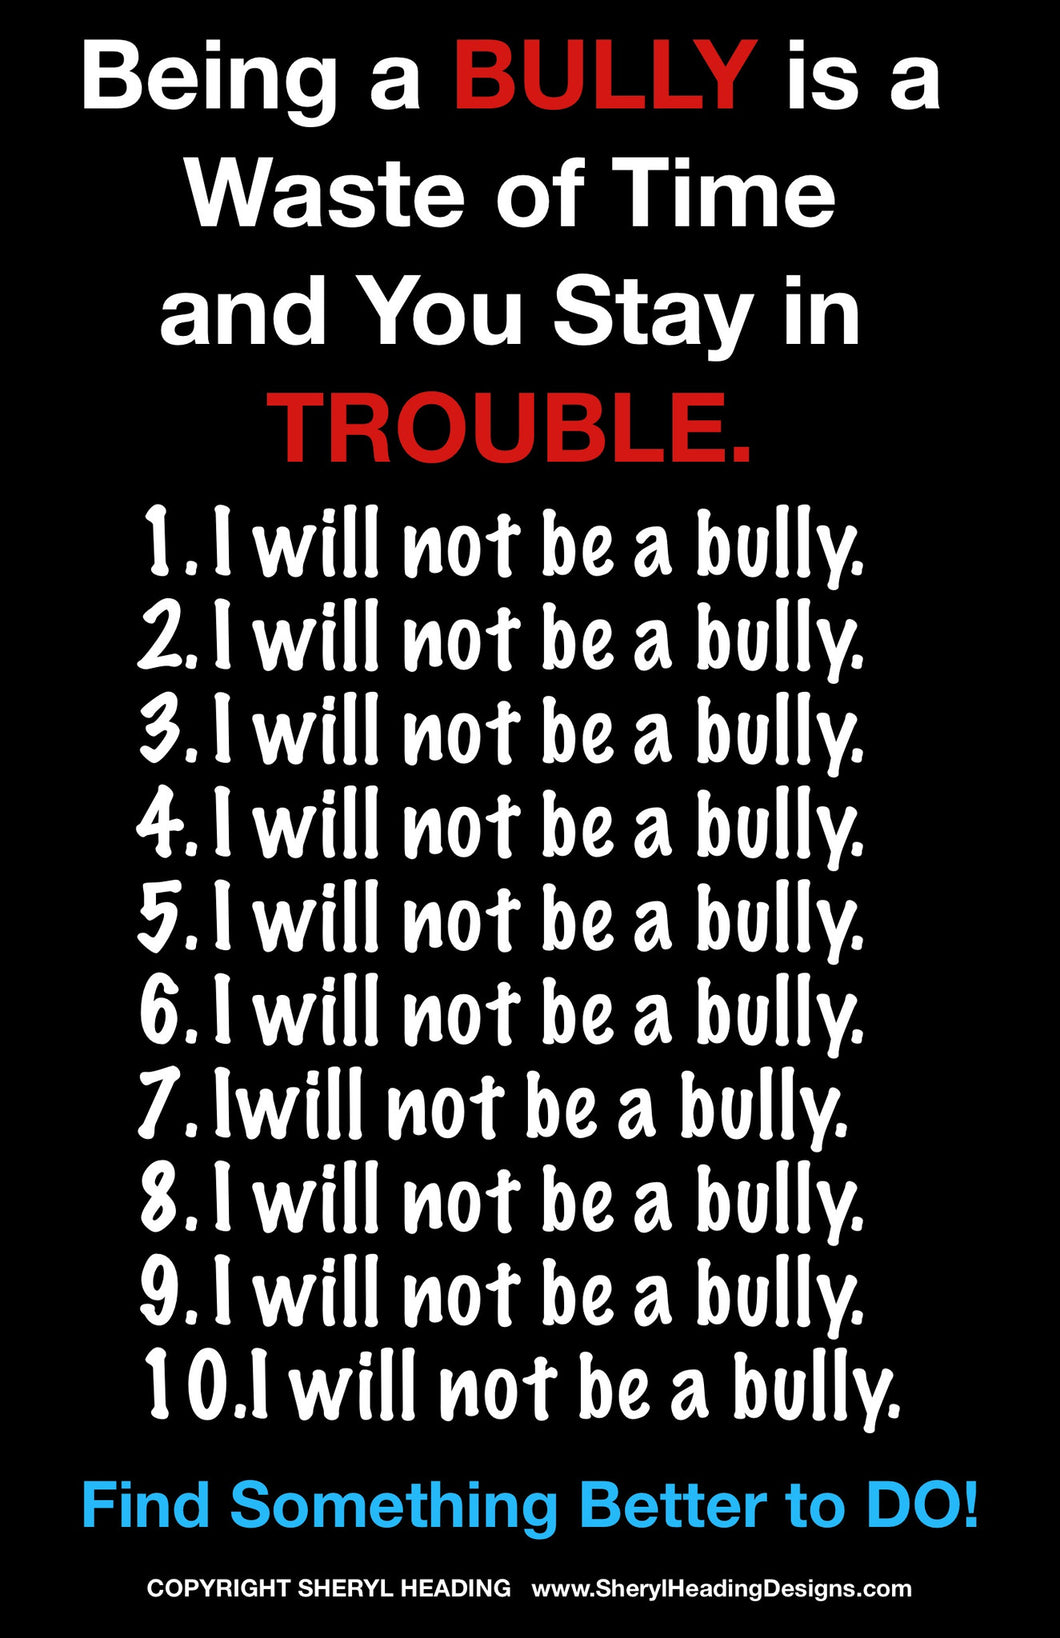 Being a Bully is a Waste of Time... Poster - Sheryl Heading Designs